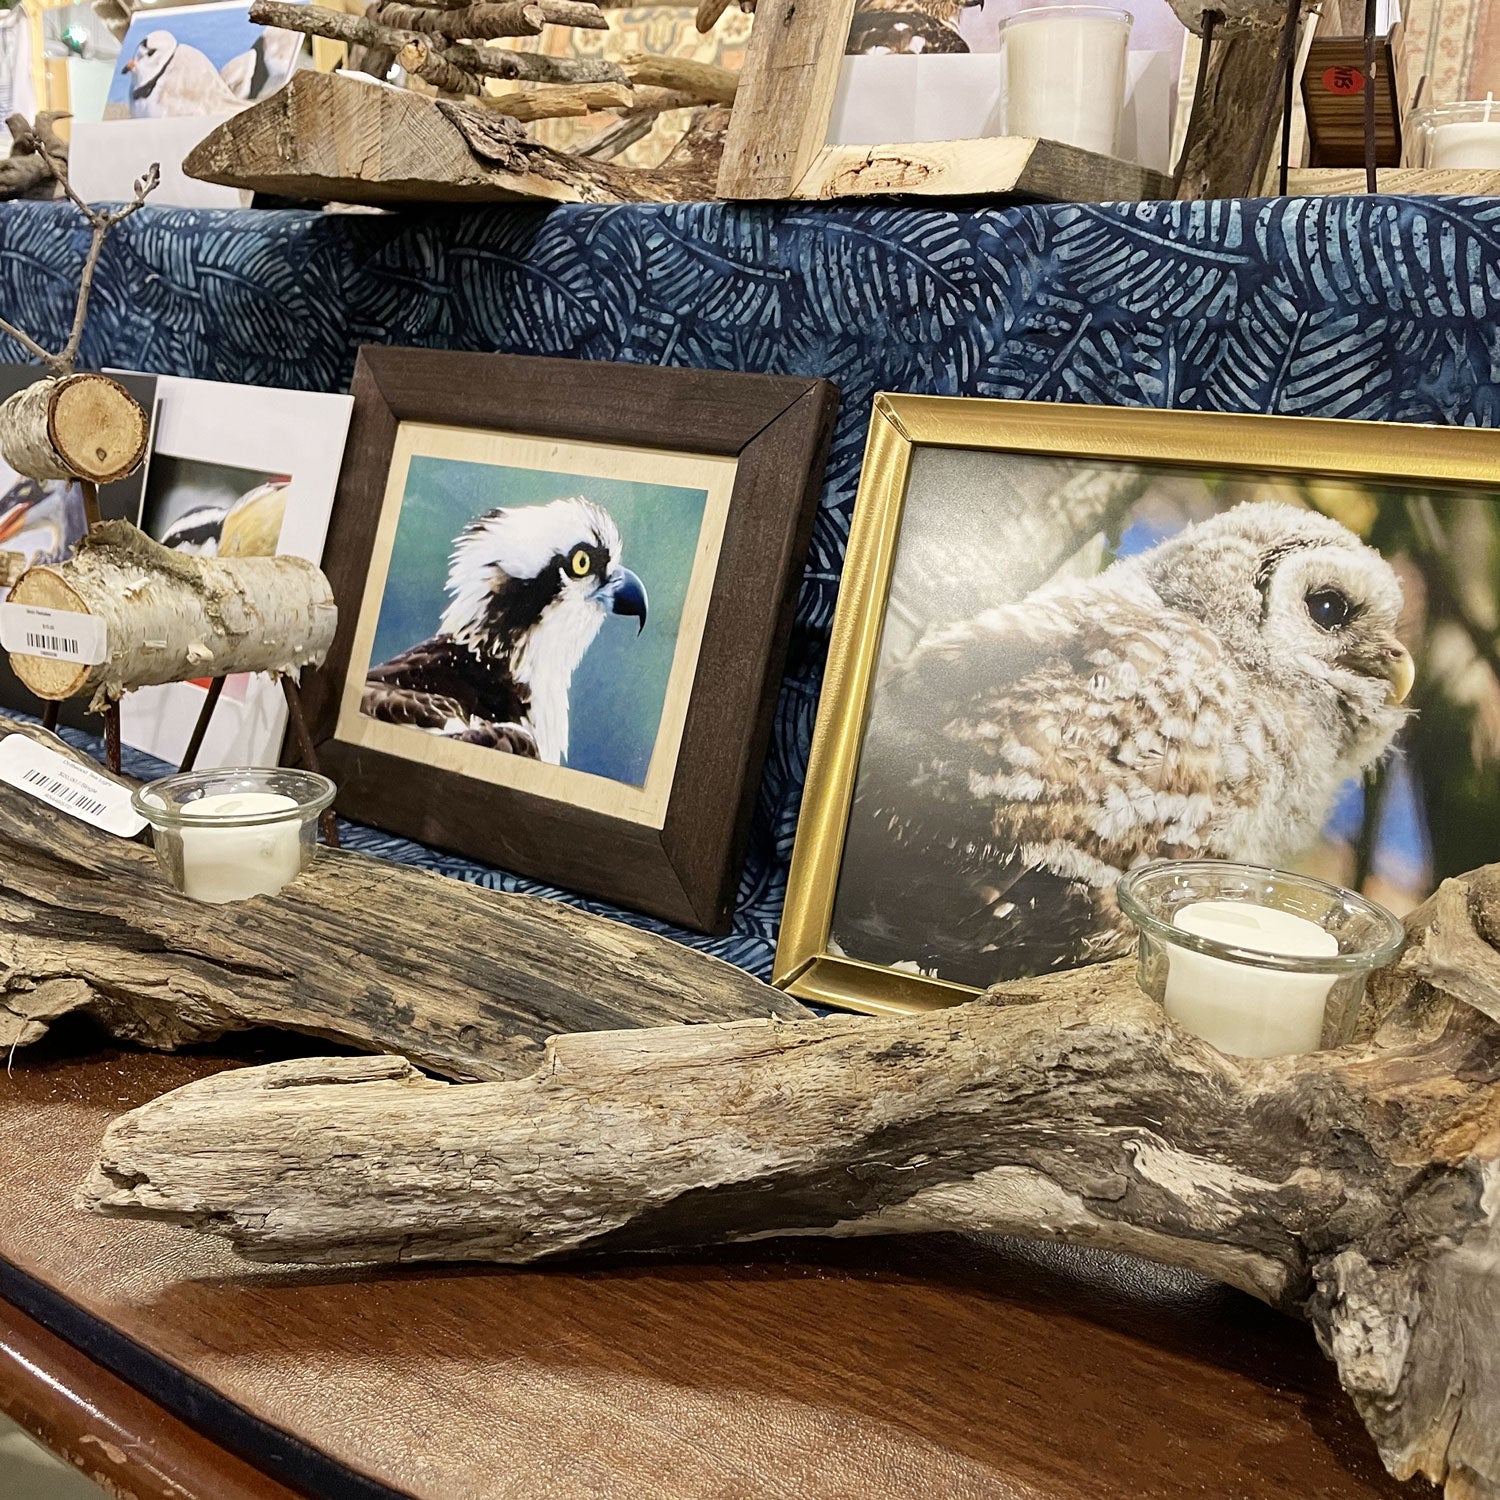 Chris Toy's framed bird photographs and driftwood candleholders